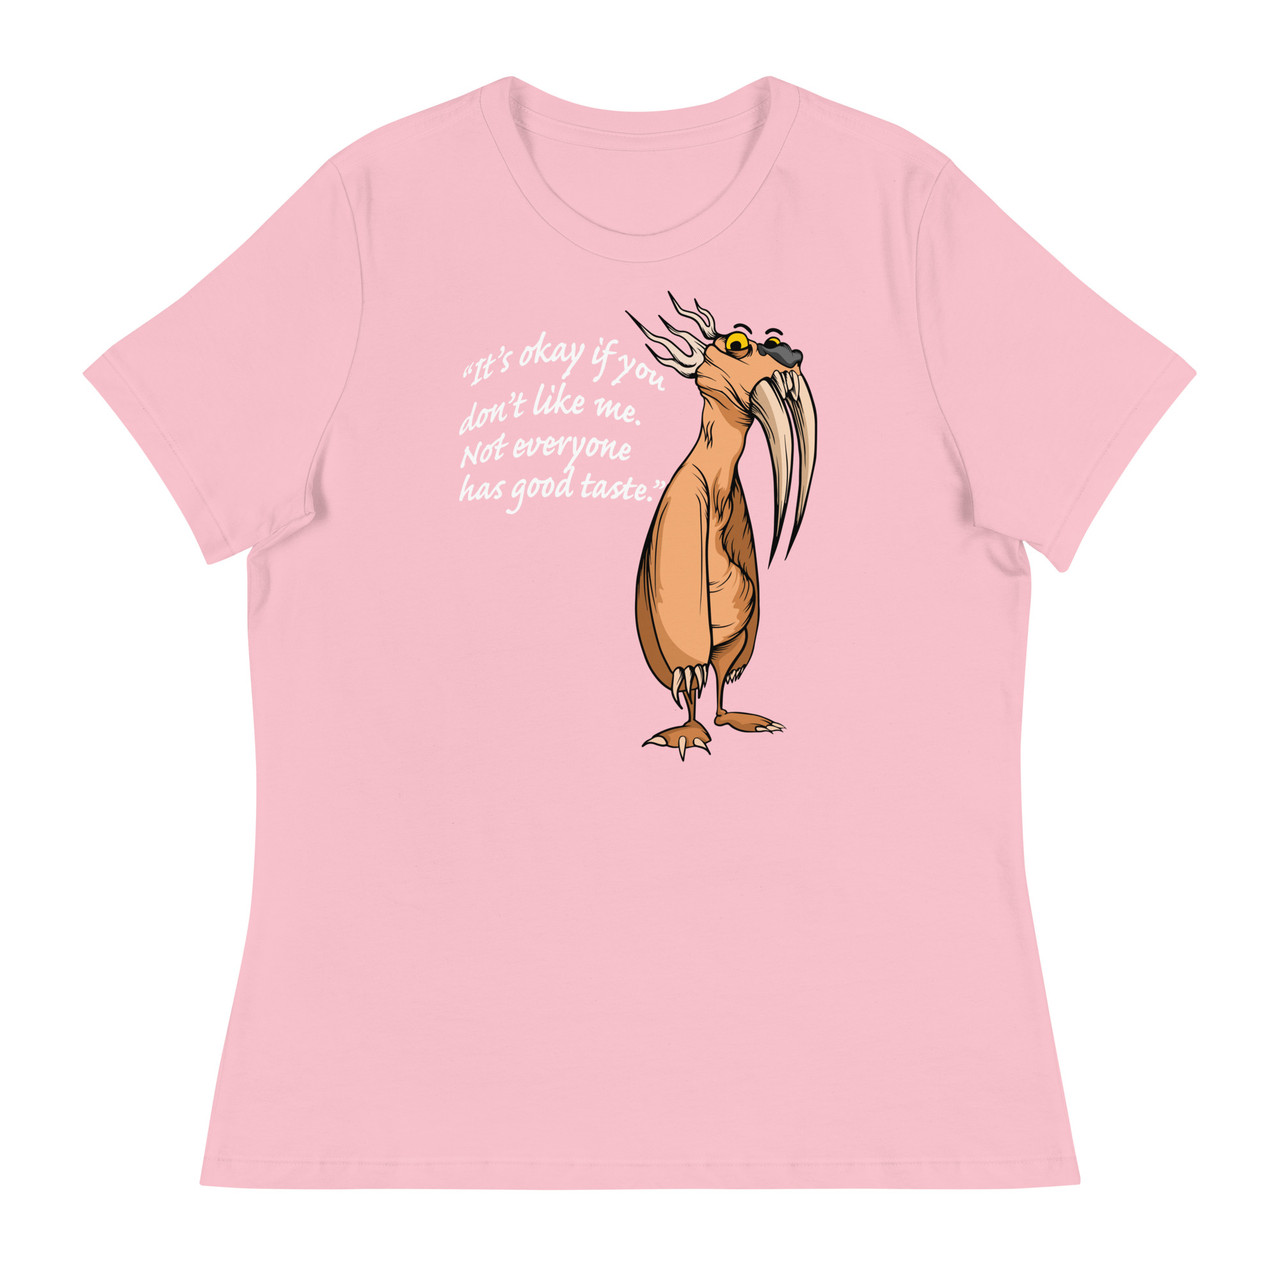 It's okay if you don't like me Women's Relaxed T-Shirt - Bella + Canvas 6400 